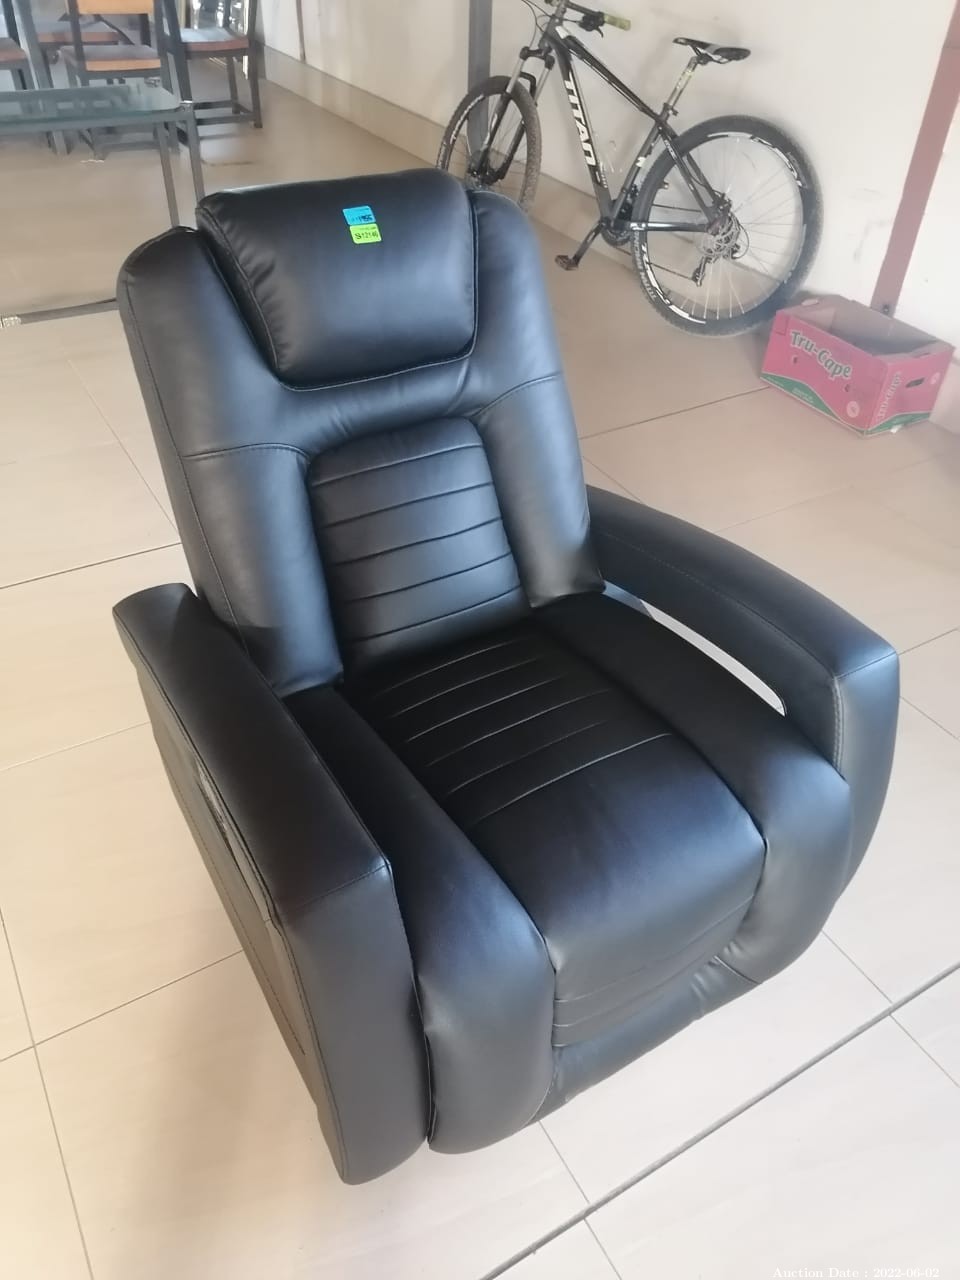 1956 - 1 x Recliner Chair Faux Leather